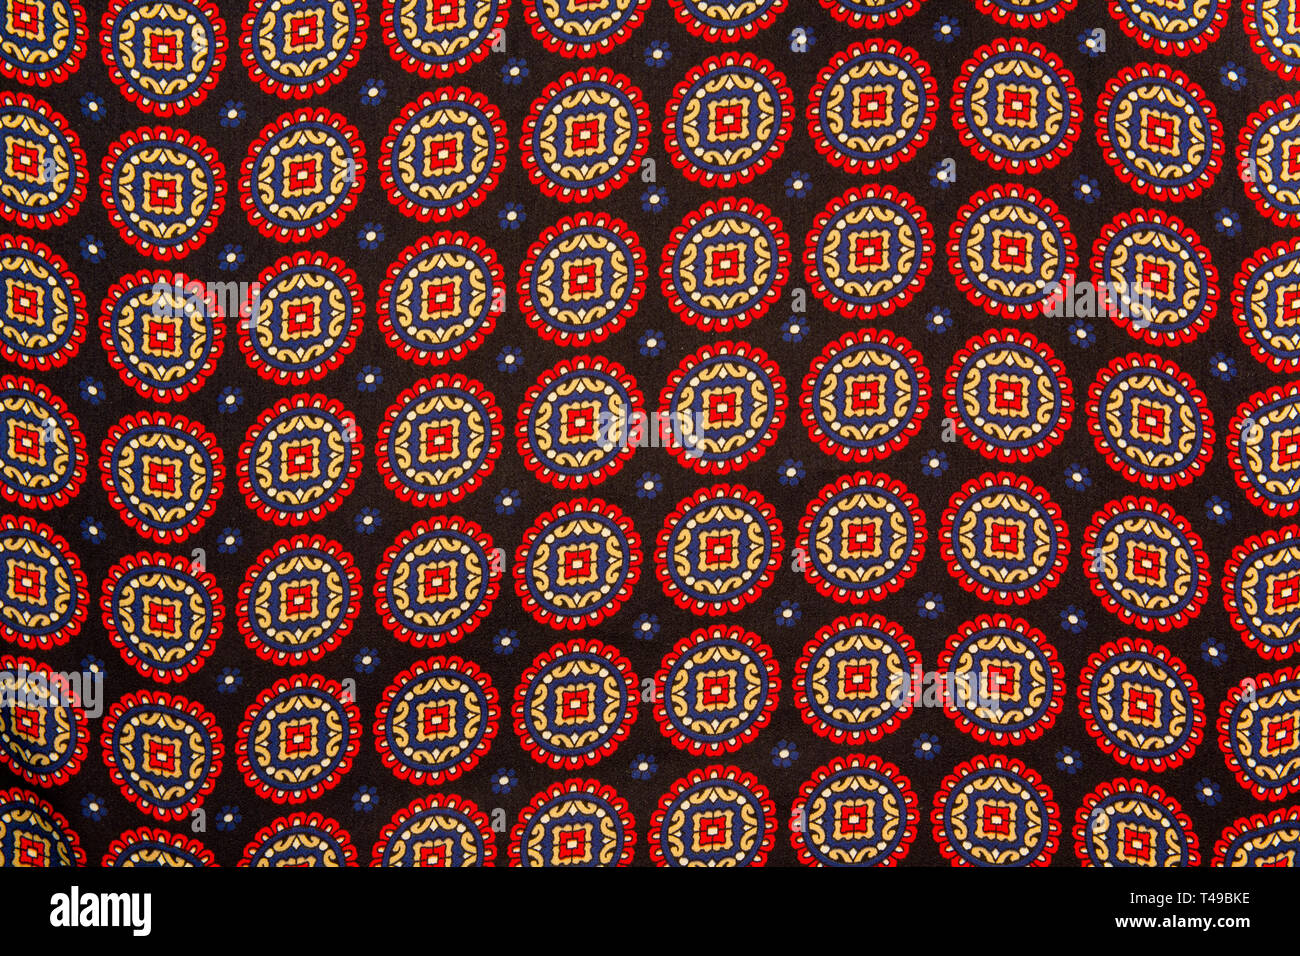 Red and blue ethnic circle pattern Stock Photo